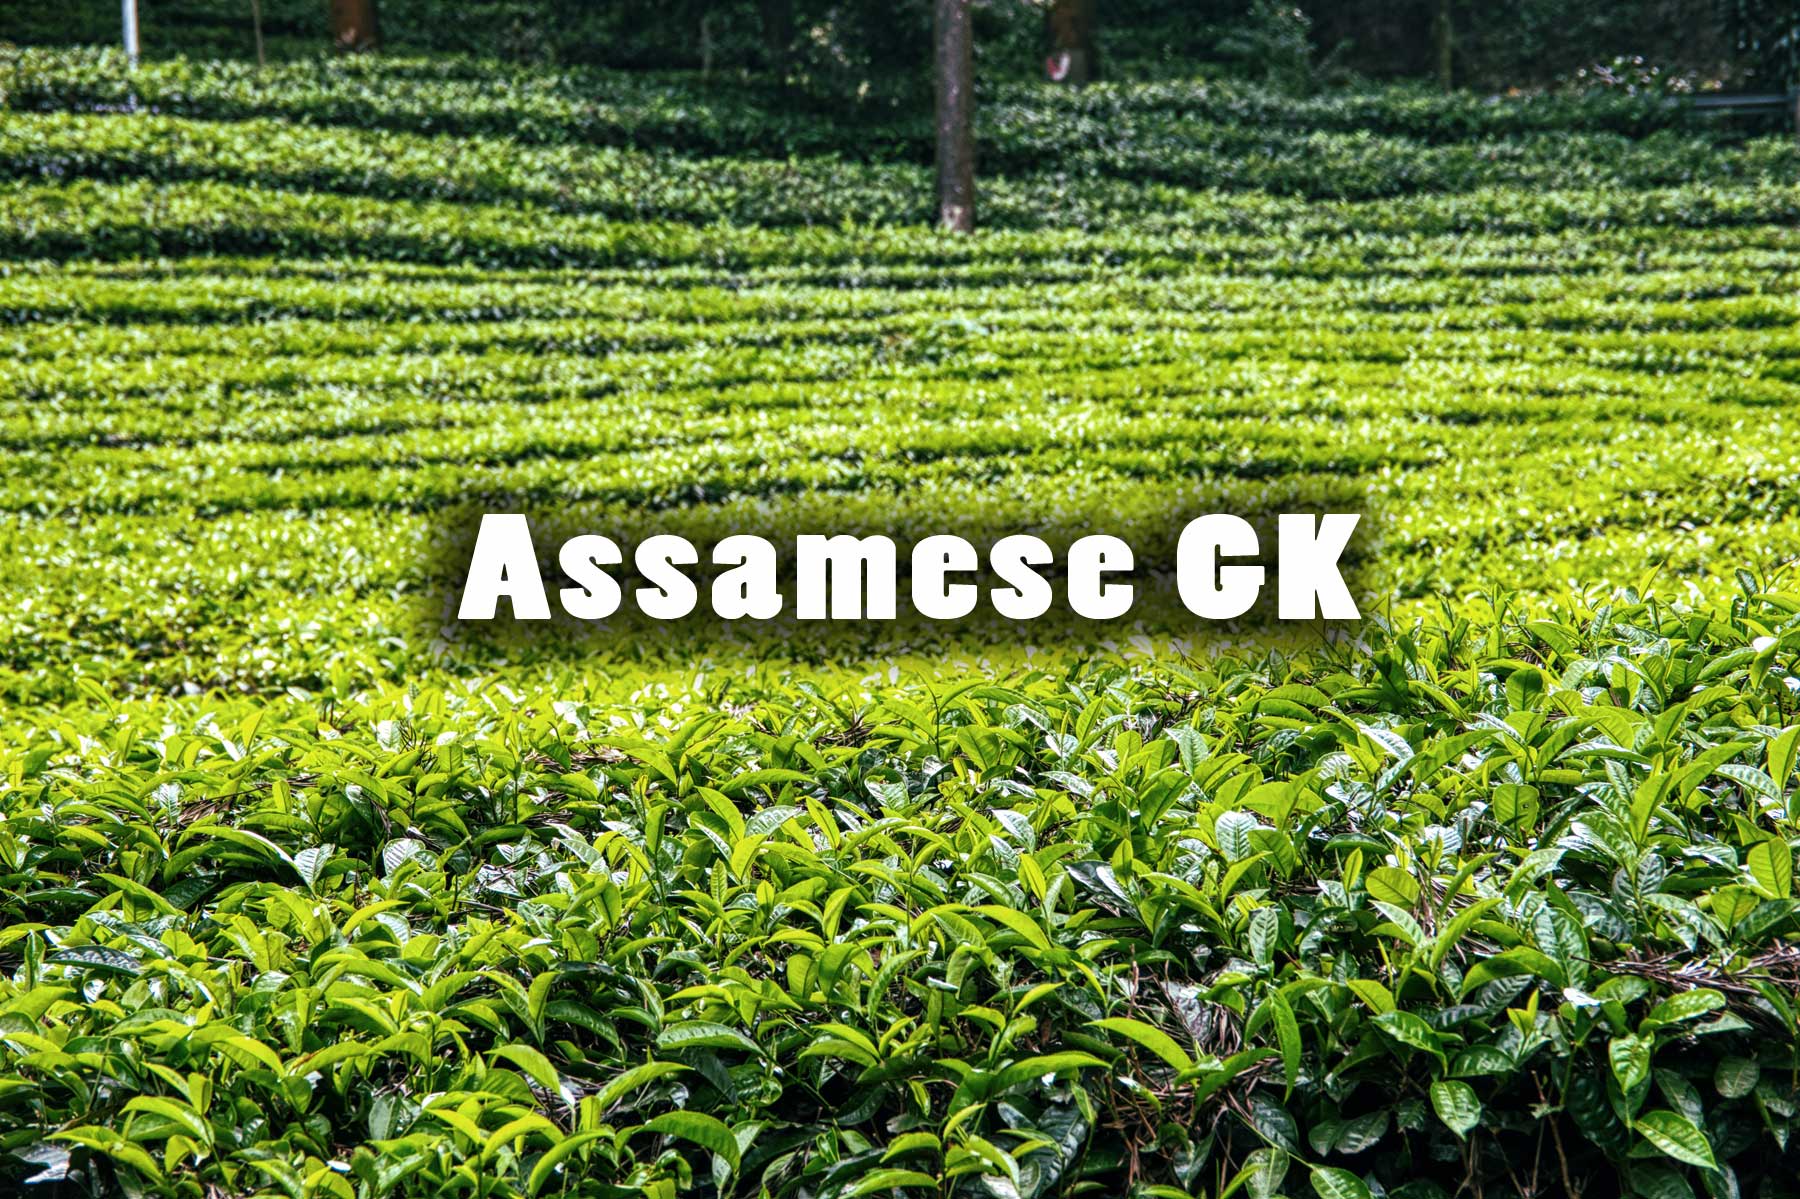 Assamese GK Sample Questions and Answers